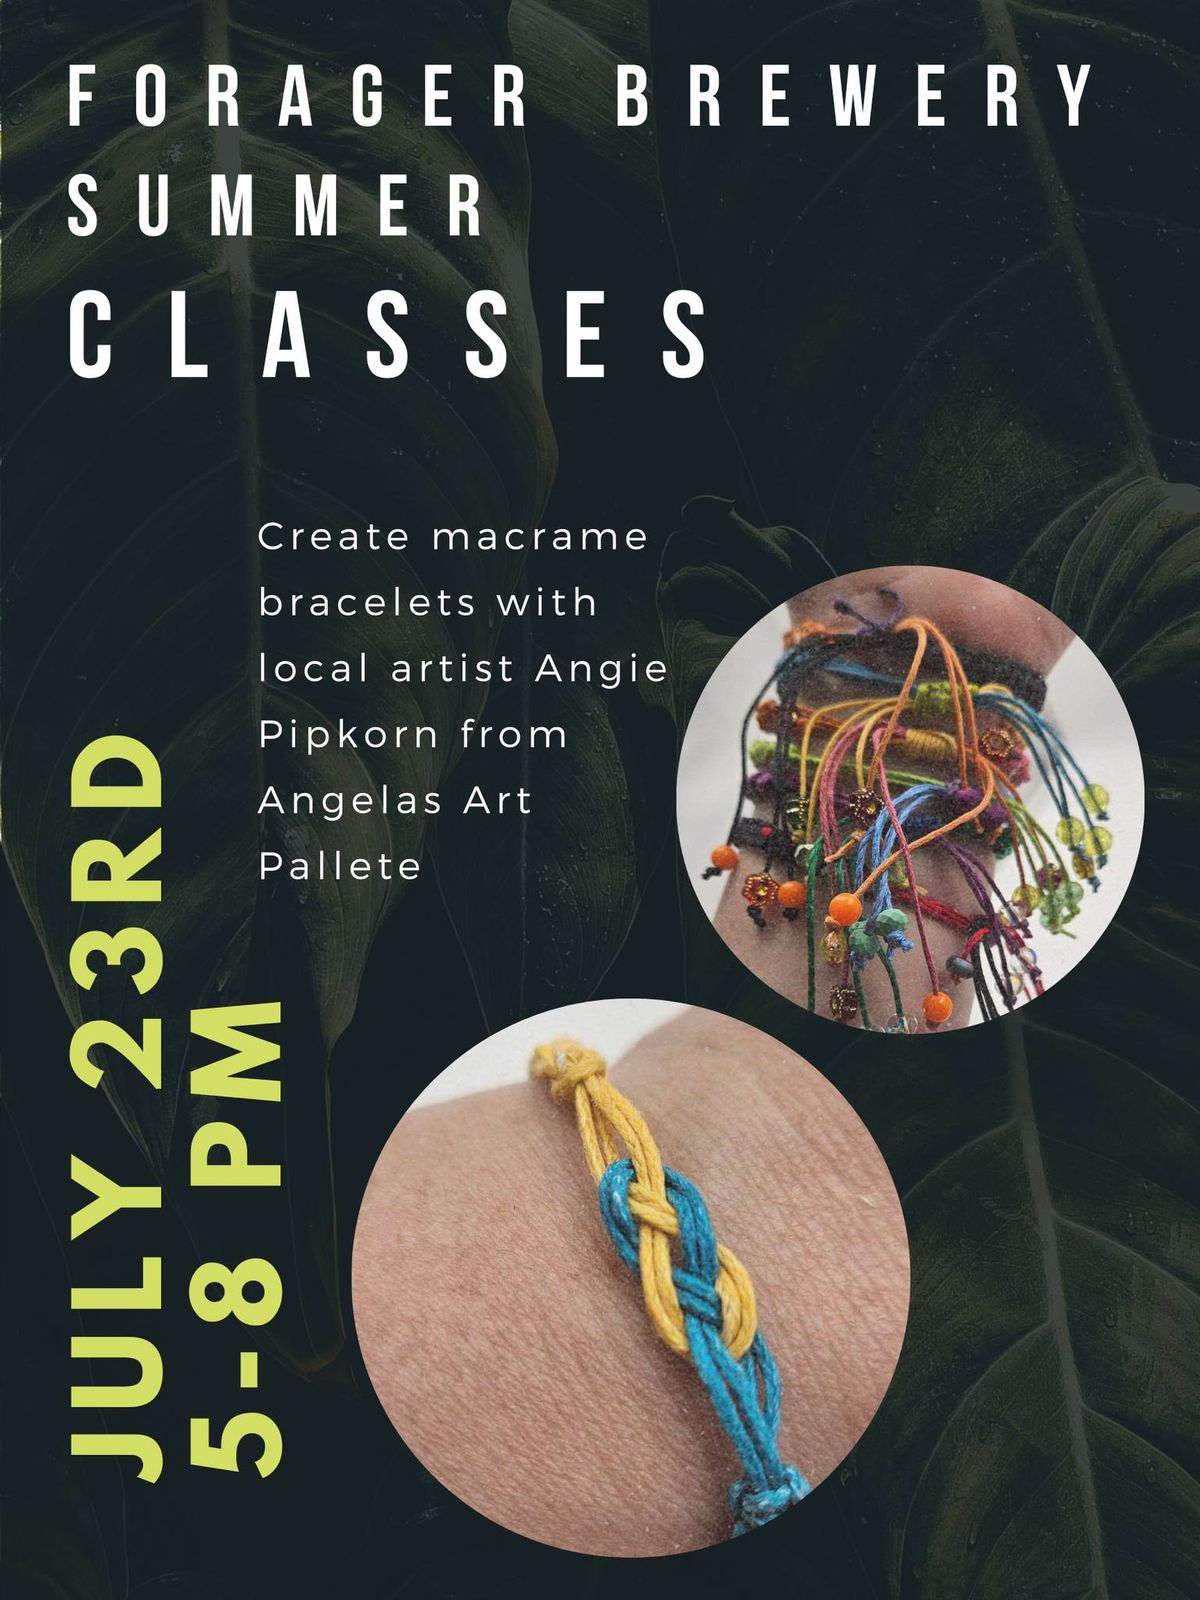 Create your own macrame bracelets with local artist Angie Pipkorn